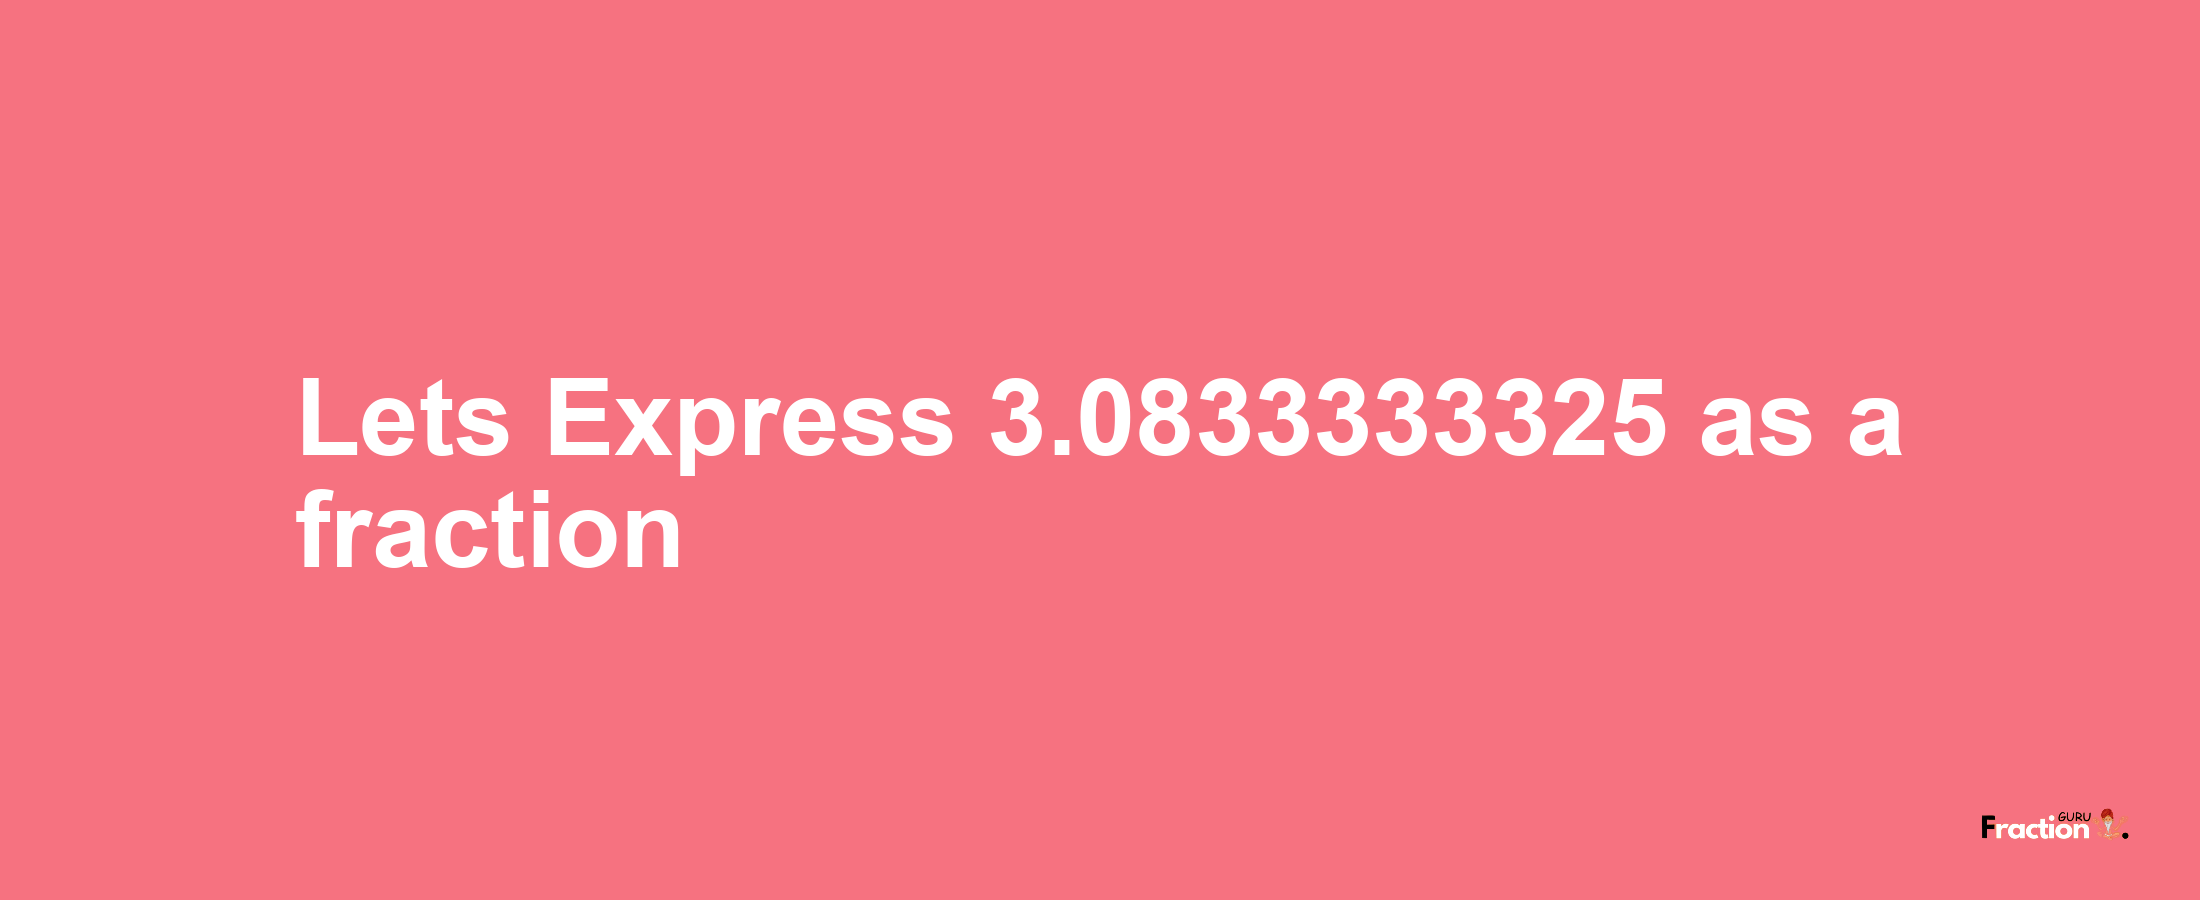 Lets Express 3.0833333325 as afraction